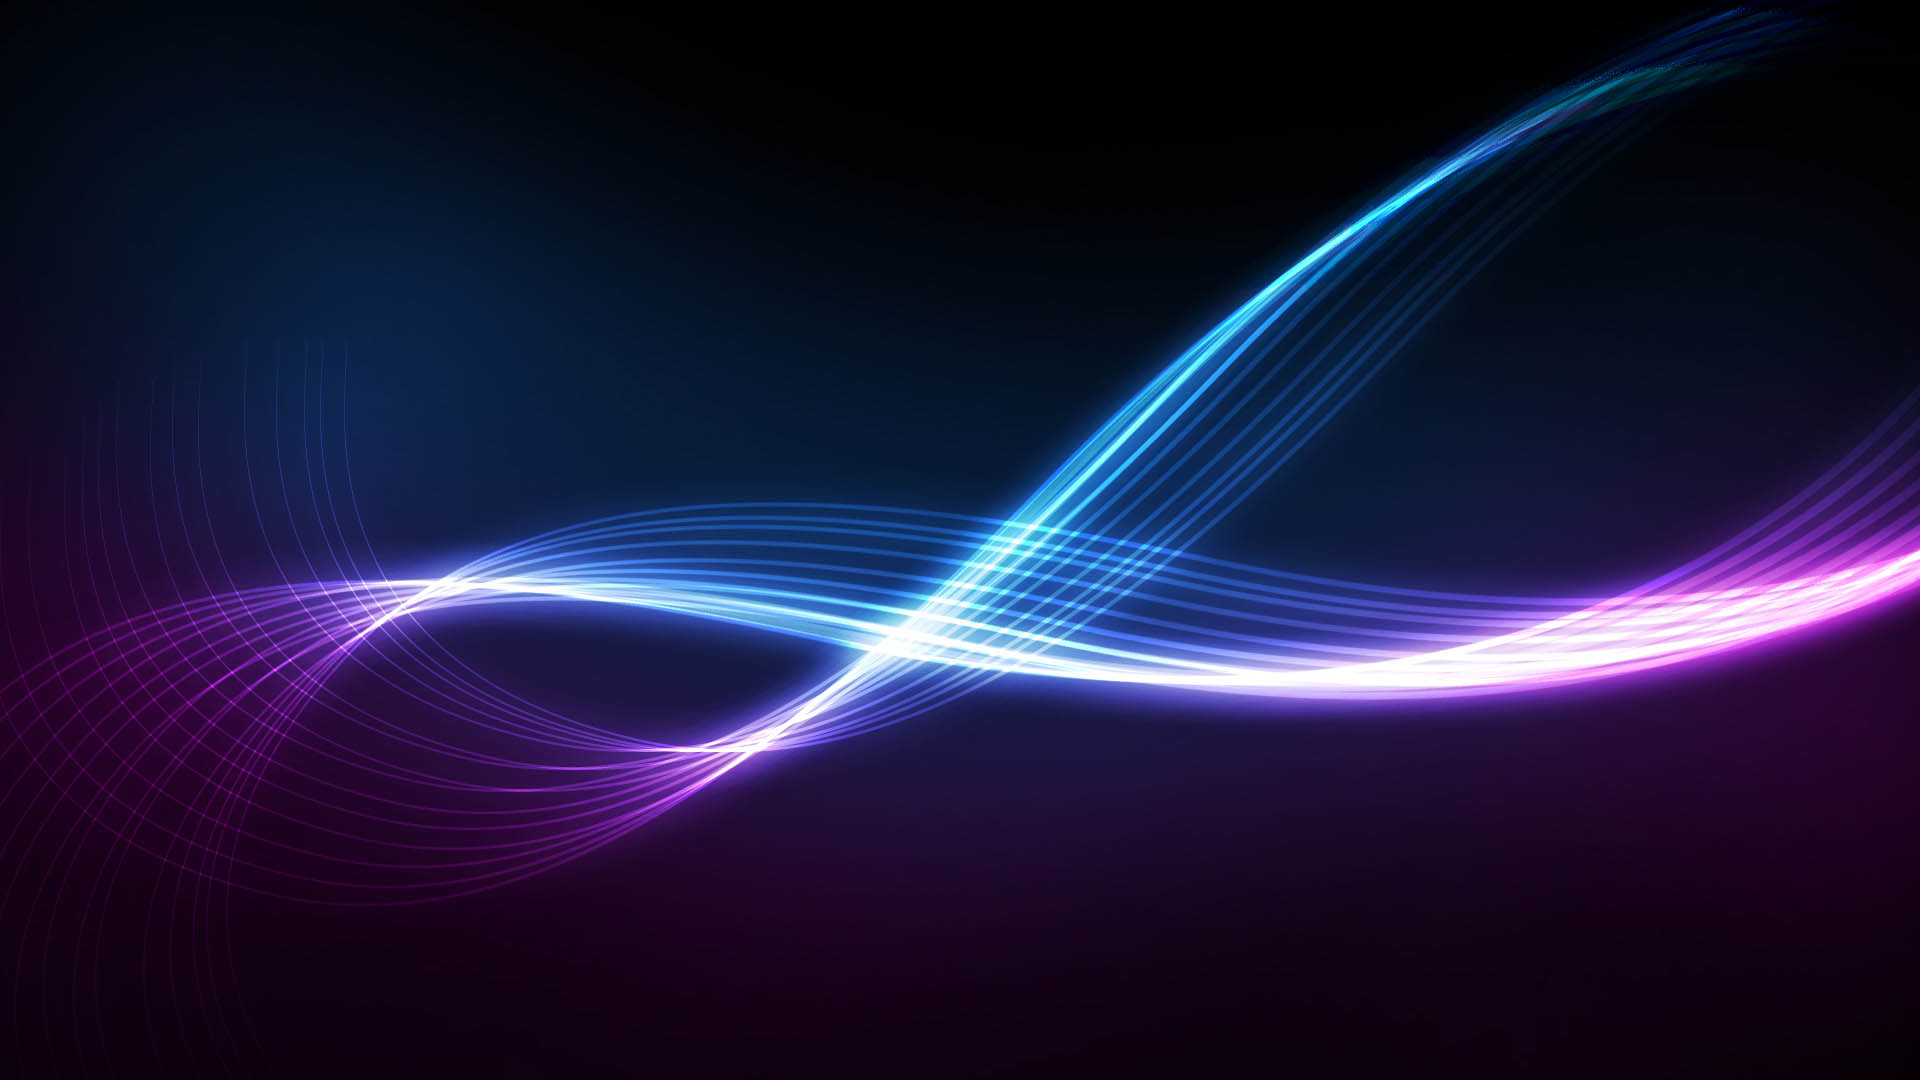 Abstract 1080p   Wallpaper High Definition High Quality Widescreen 1920x1080